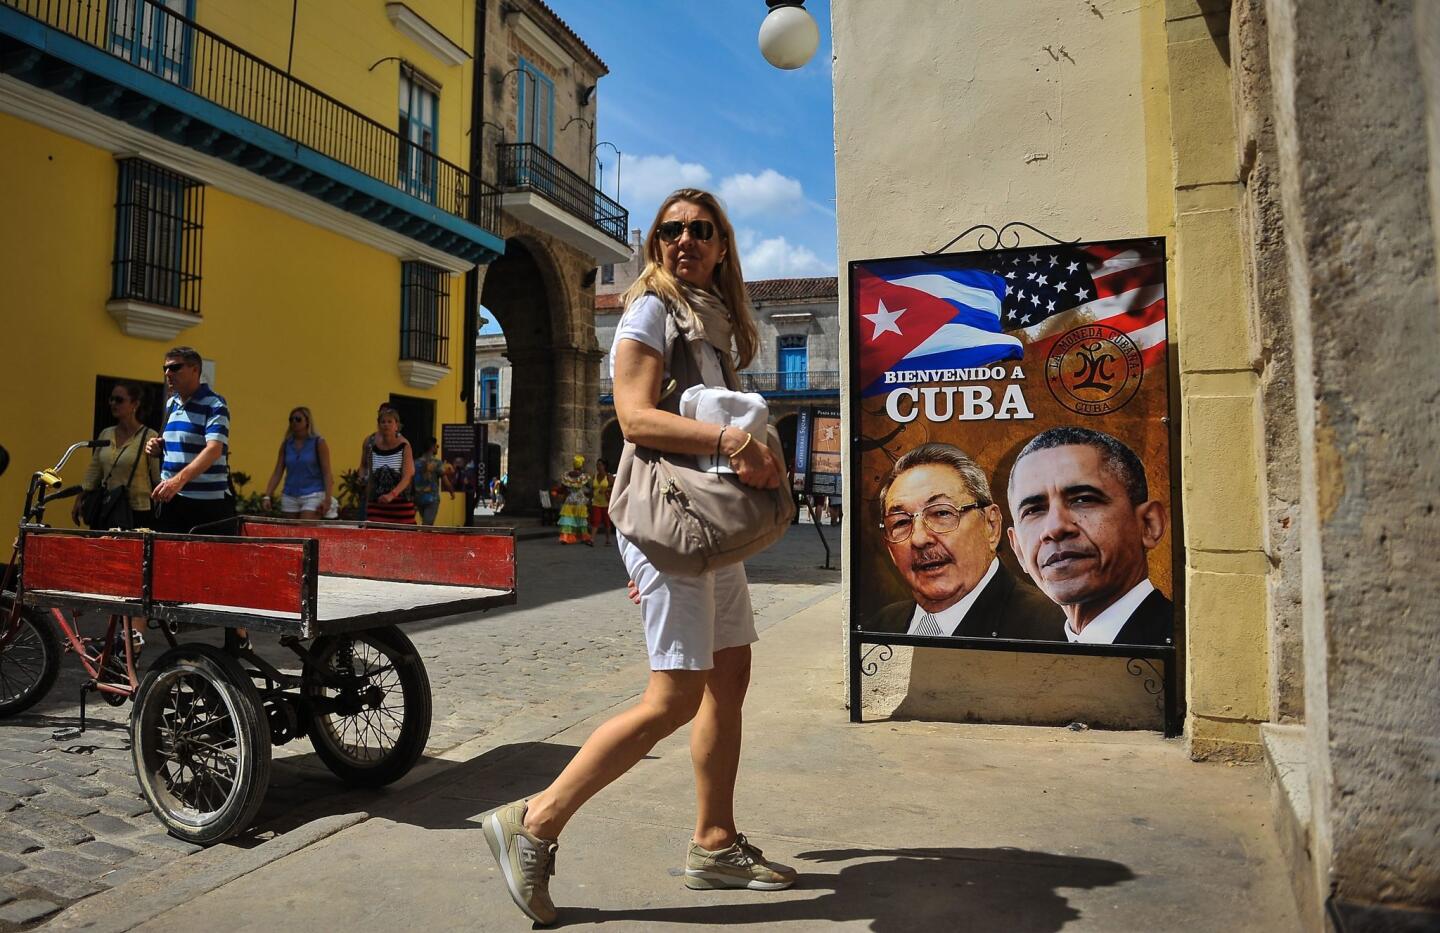 A tourist walks next to a poster of Cuban president Raul Castro and U.S. President Barack Obama on March 17, 2016. Hundreds of workers have been scrambling for days to touch up building facades, patch potholes and spiff up Havana's monuments ahead of Obama's visit.